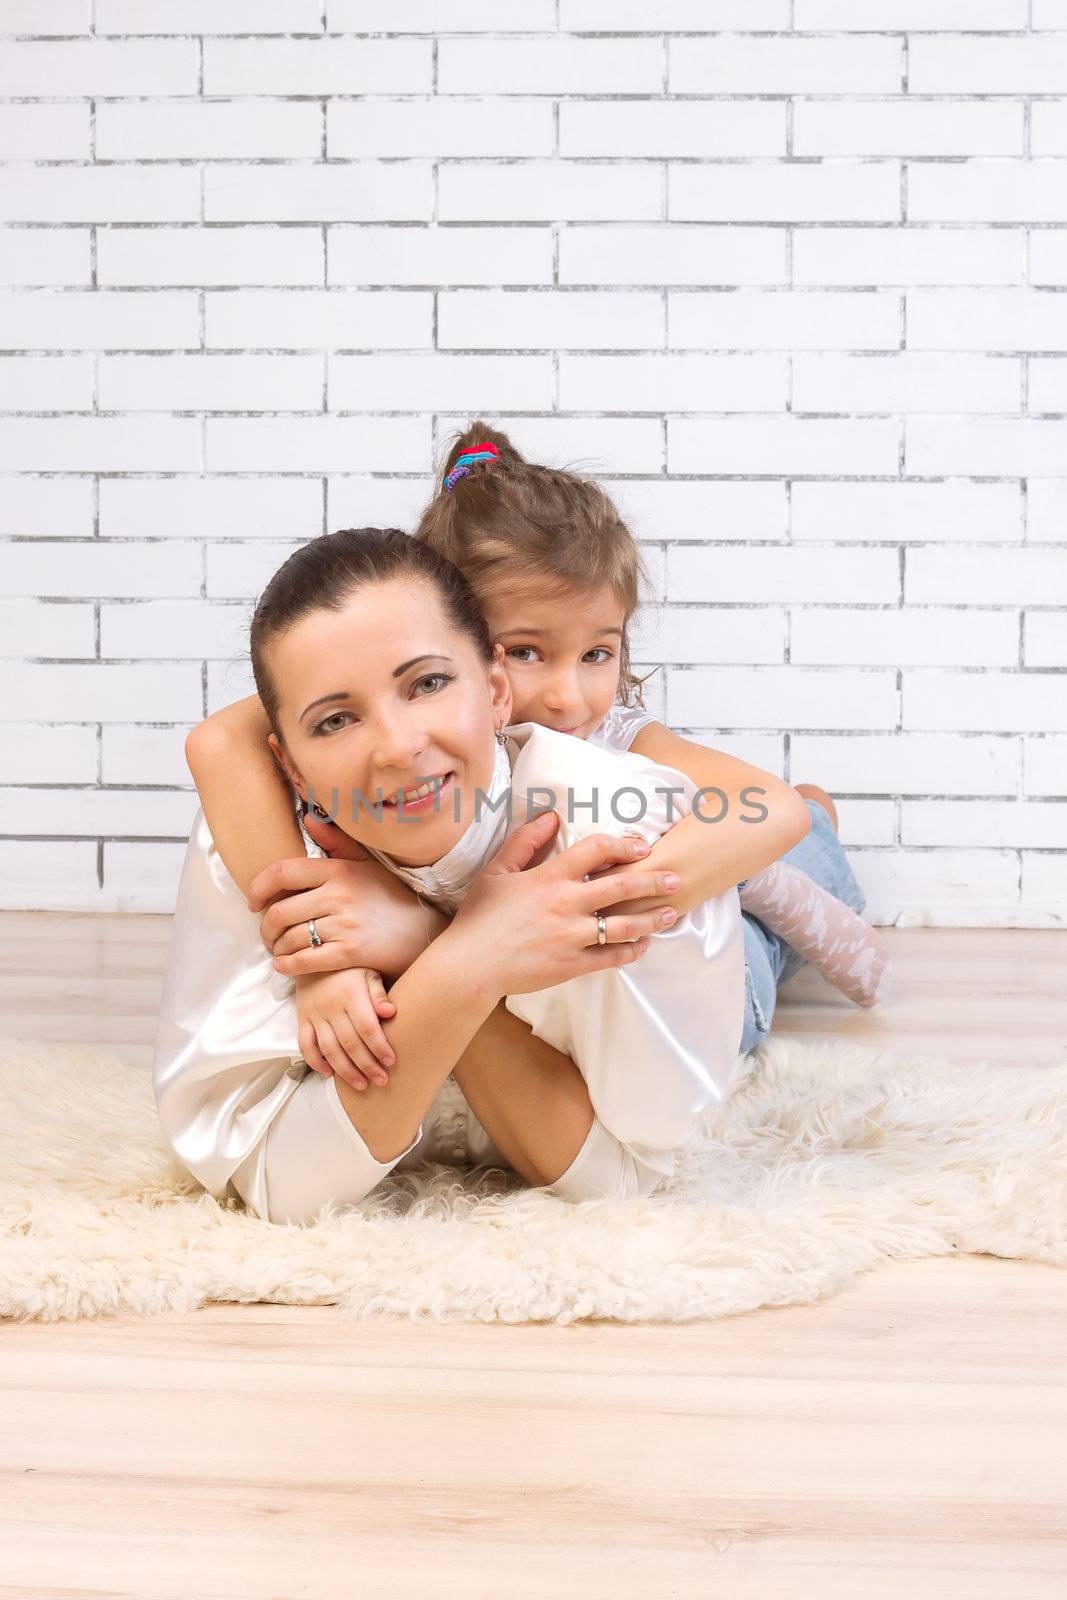 daughter riding on her mother hugging by victosha